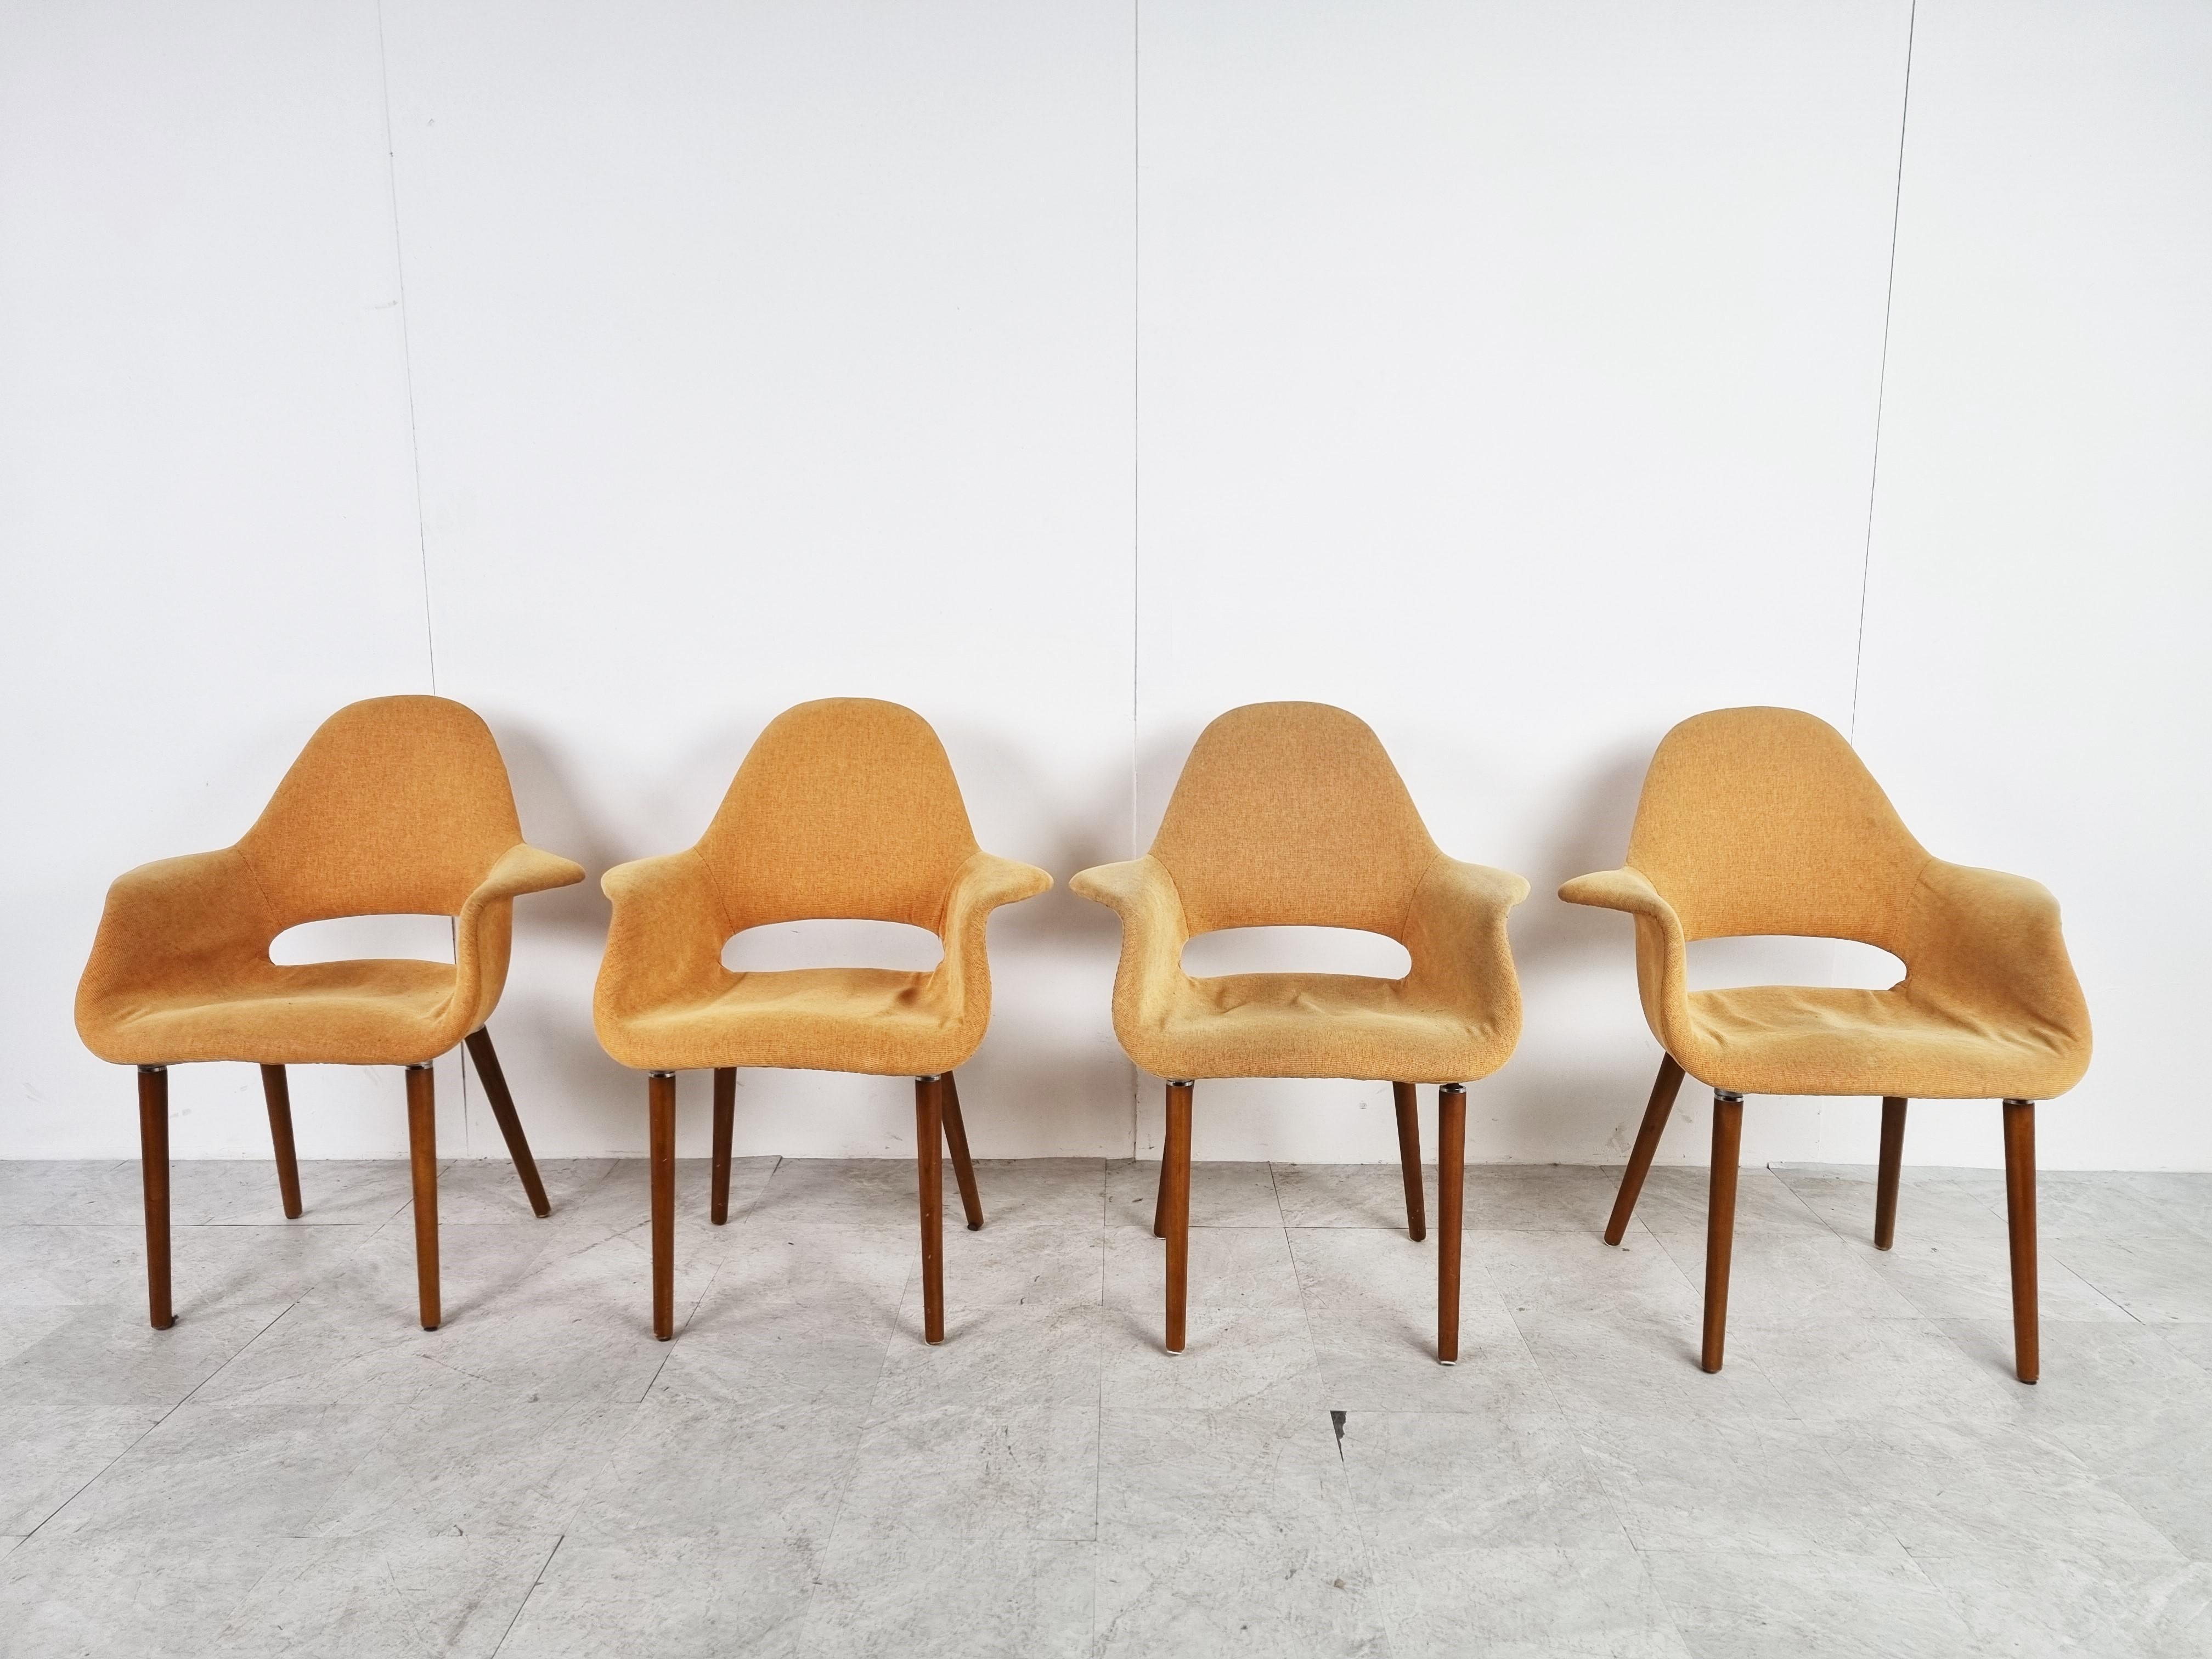 Elegant organic armchairs with yellow / orange upholstered shells on 4 wooden legs.

Good condition.

1970s

Dimensions:
Height: 88 cm / 34.64